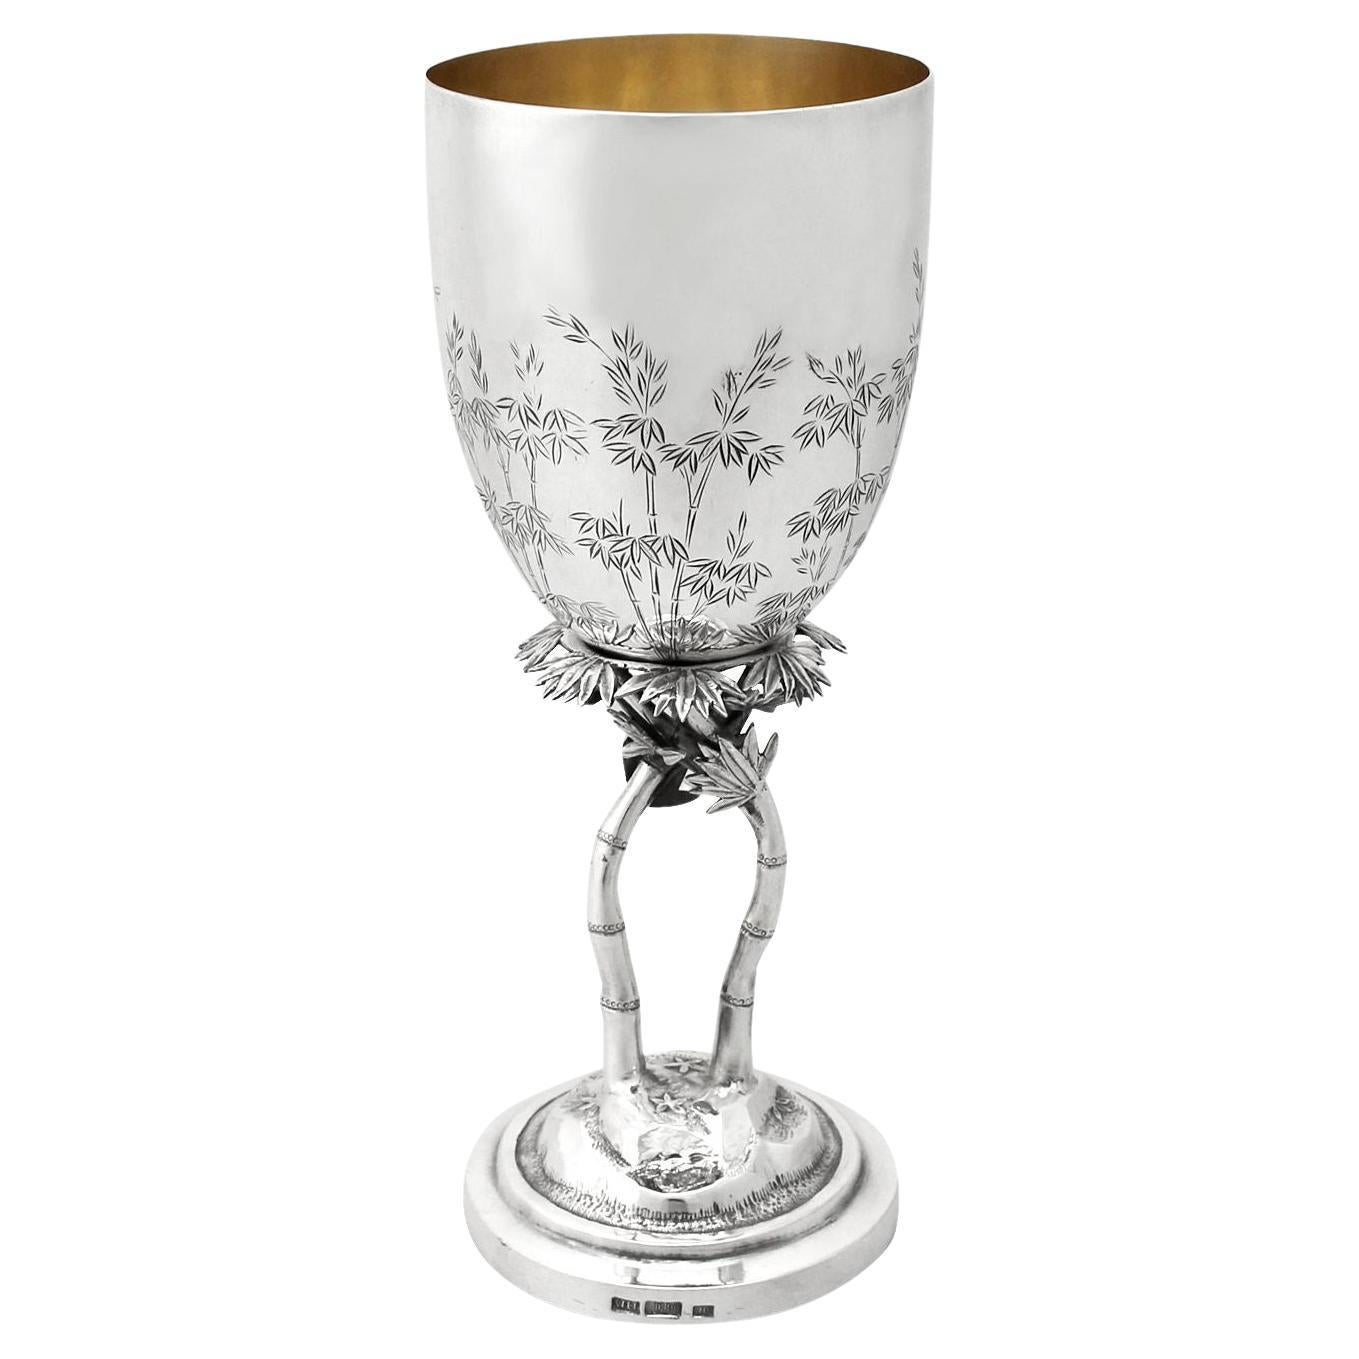 Antique Chinese Export Silver Goblet